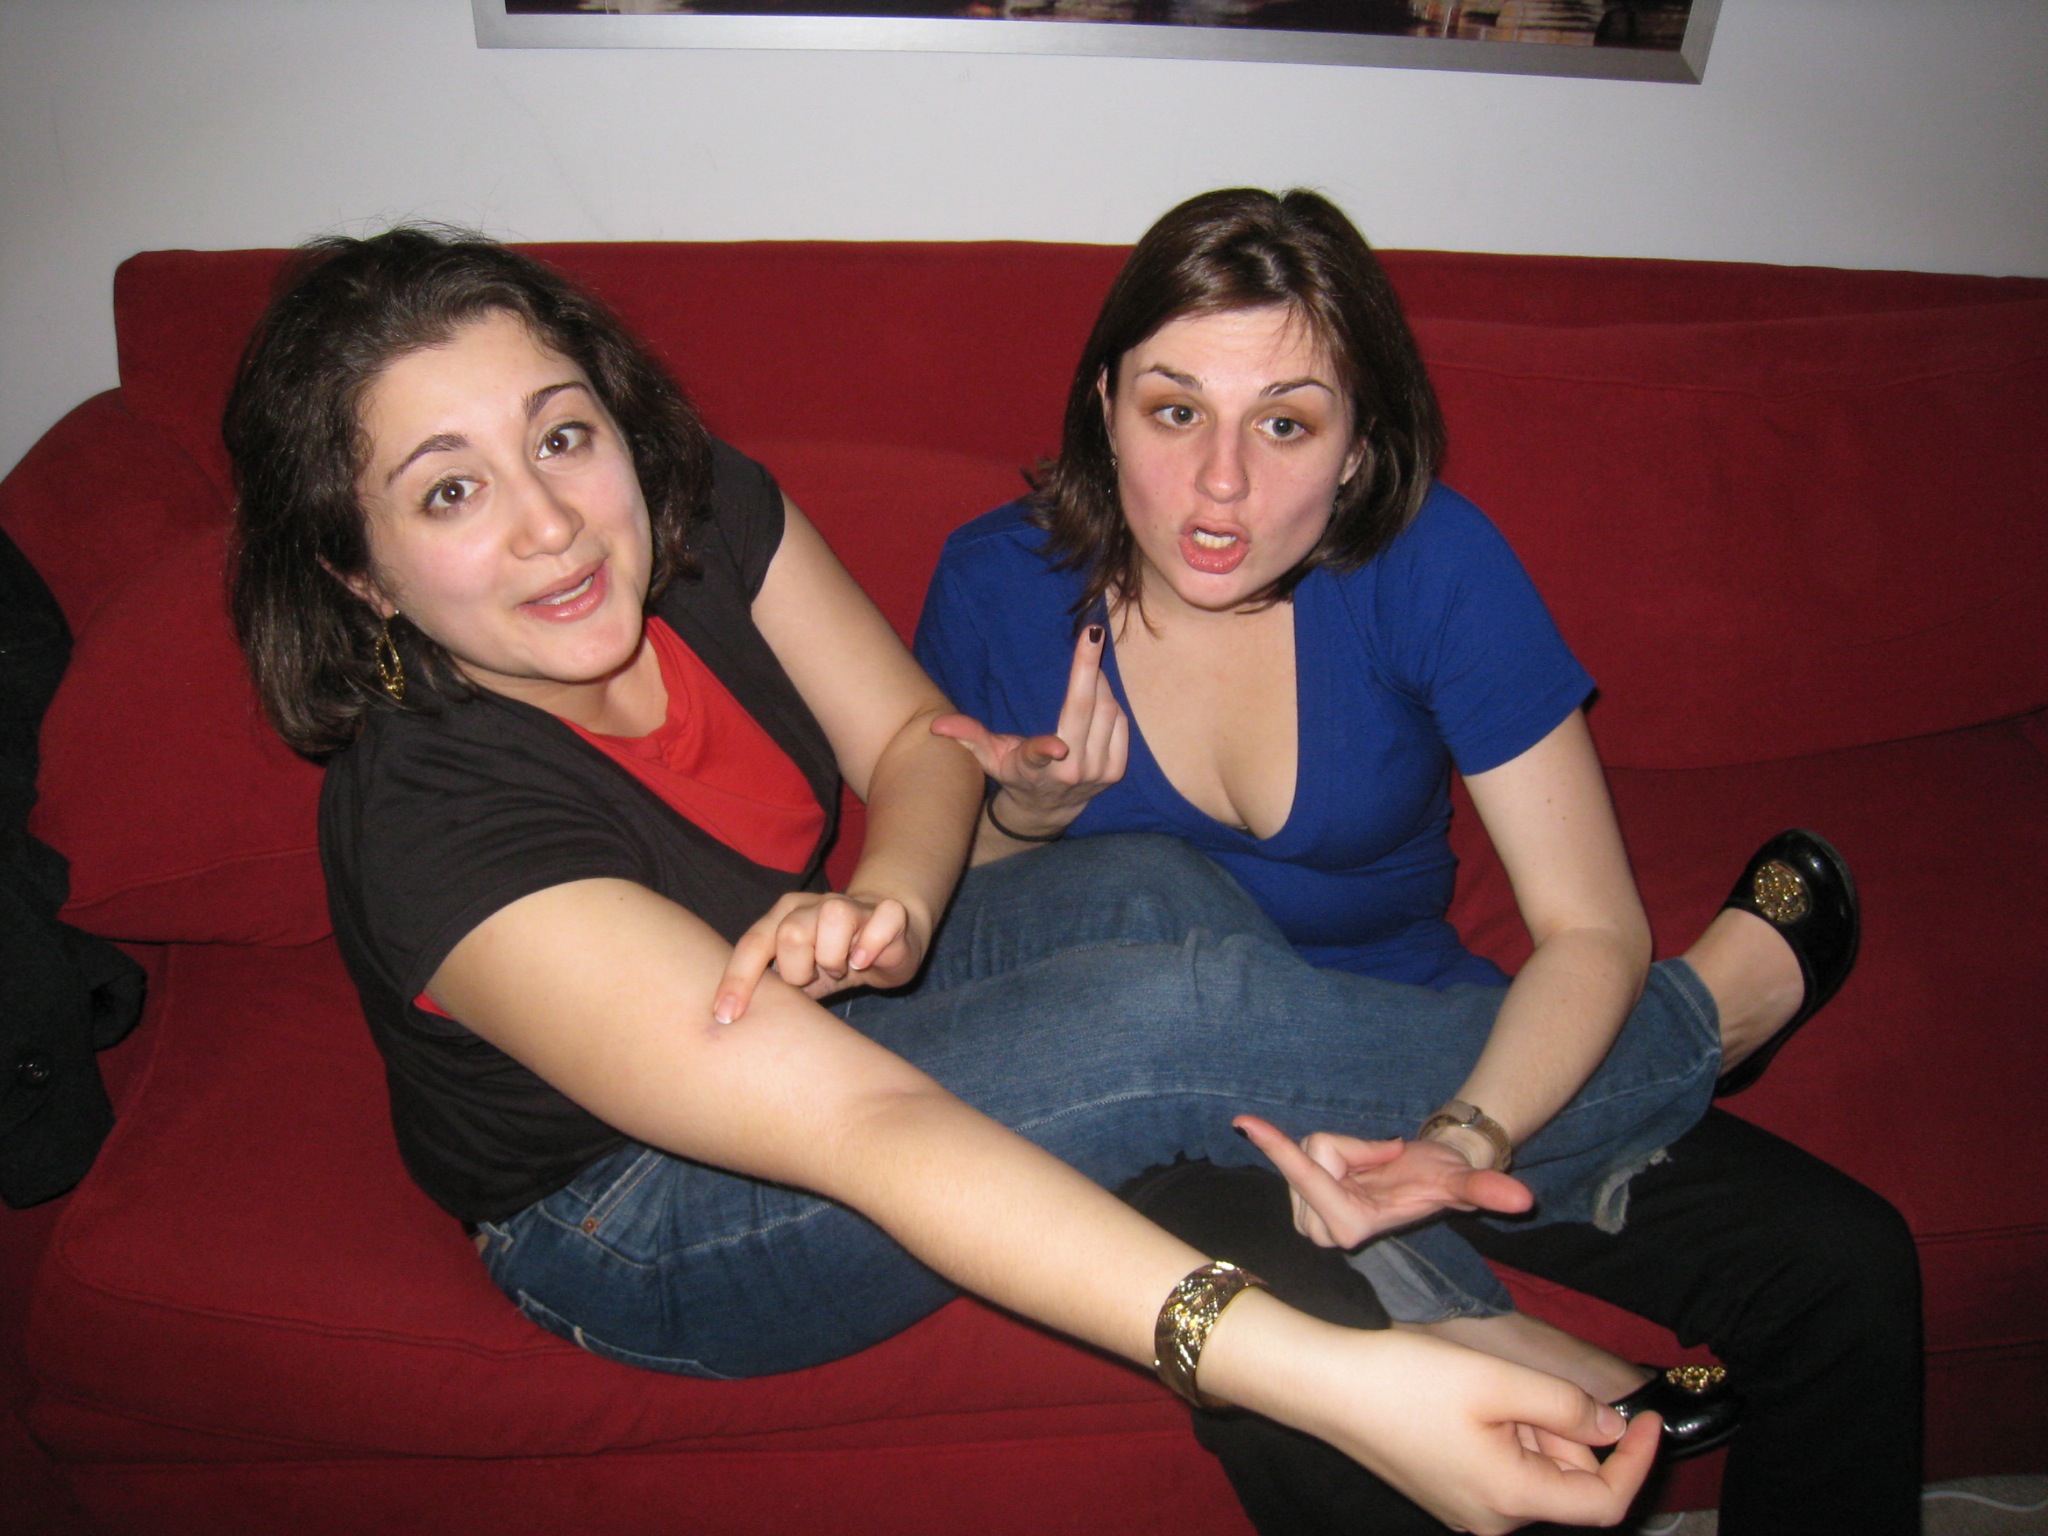 a girl is sitting on the couch with another girl